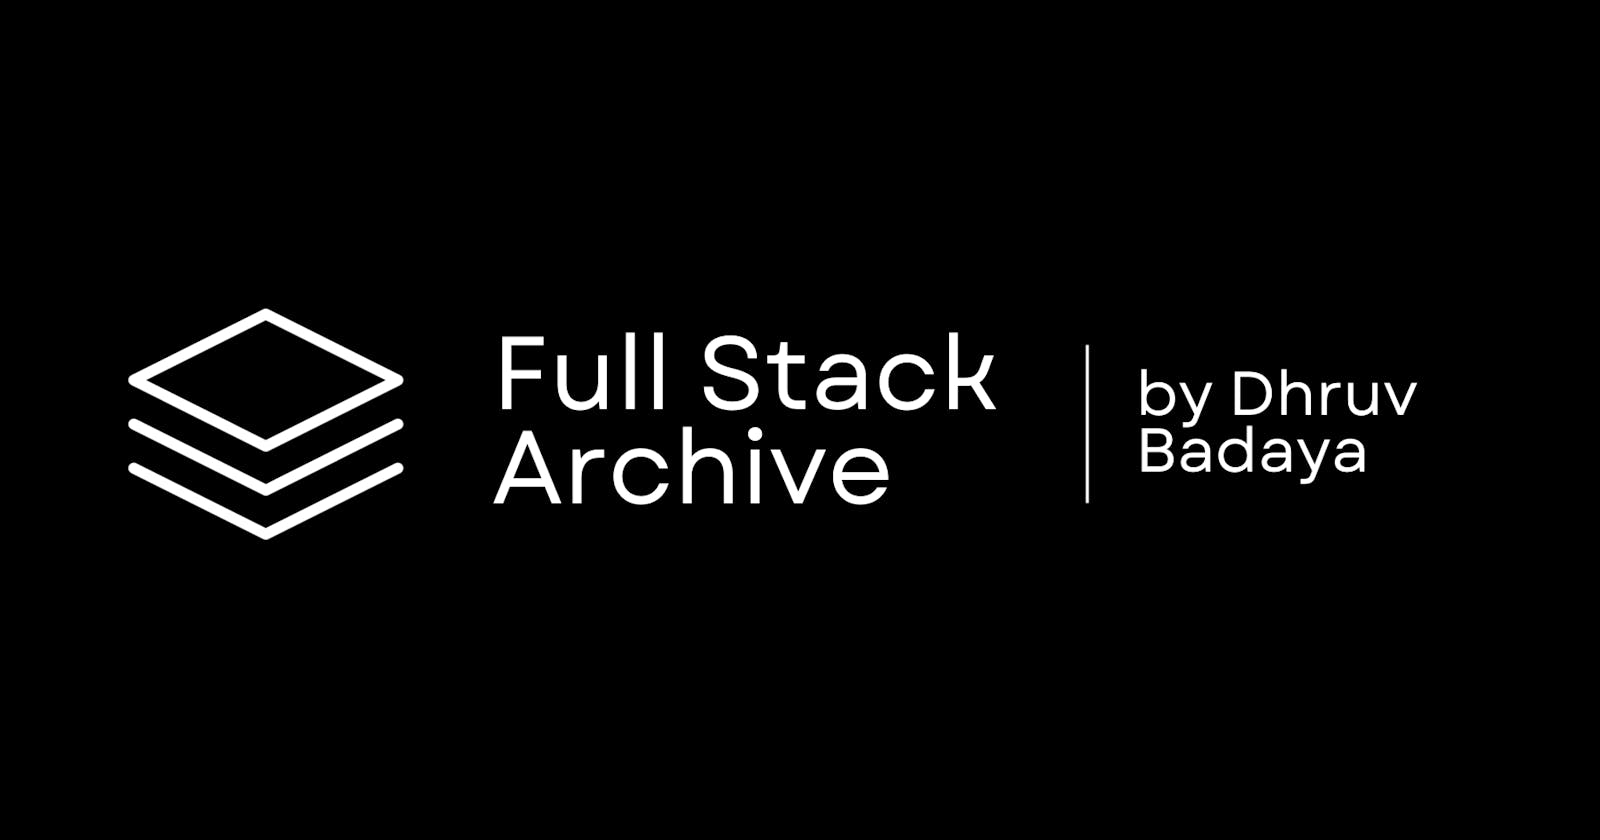 What is The Full Stack Archive?